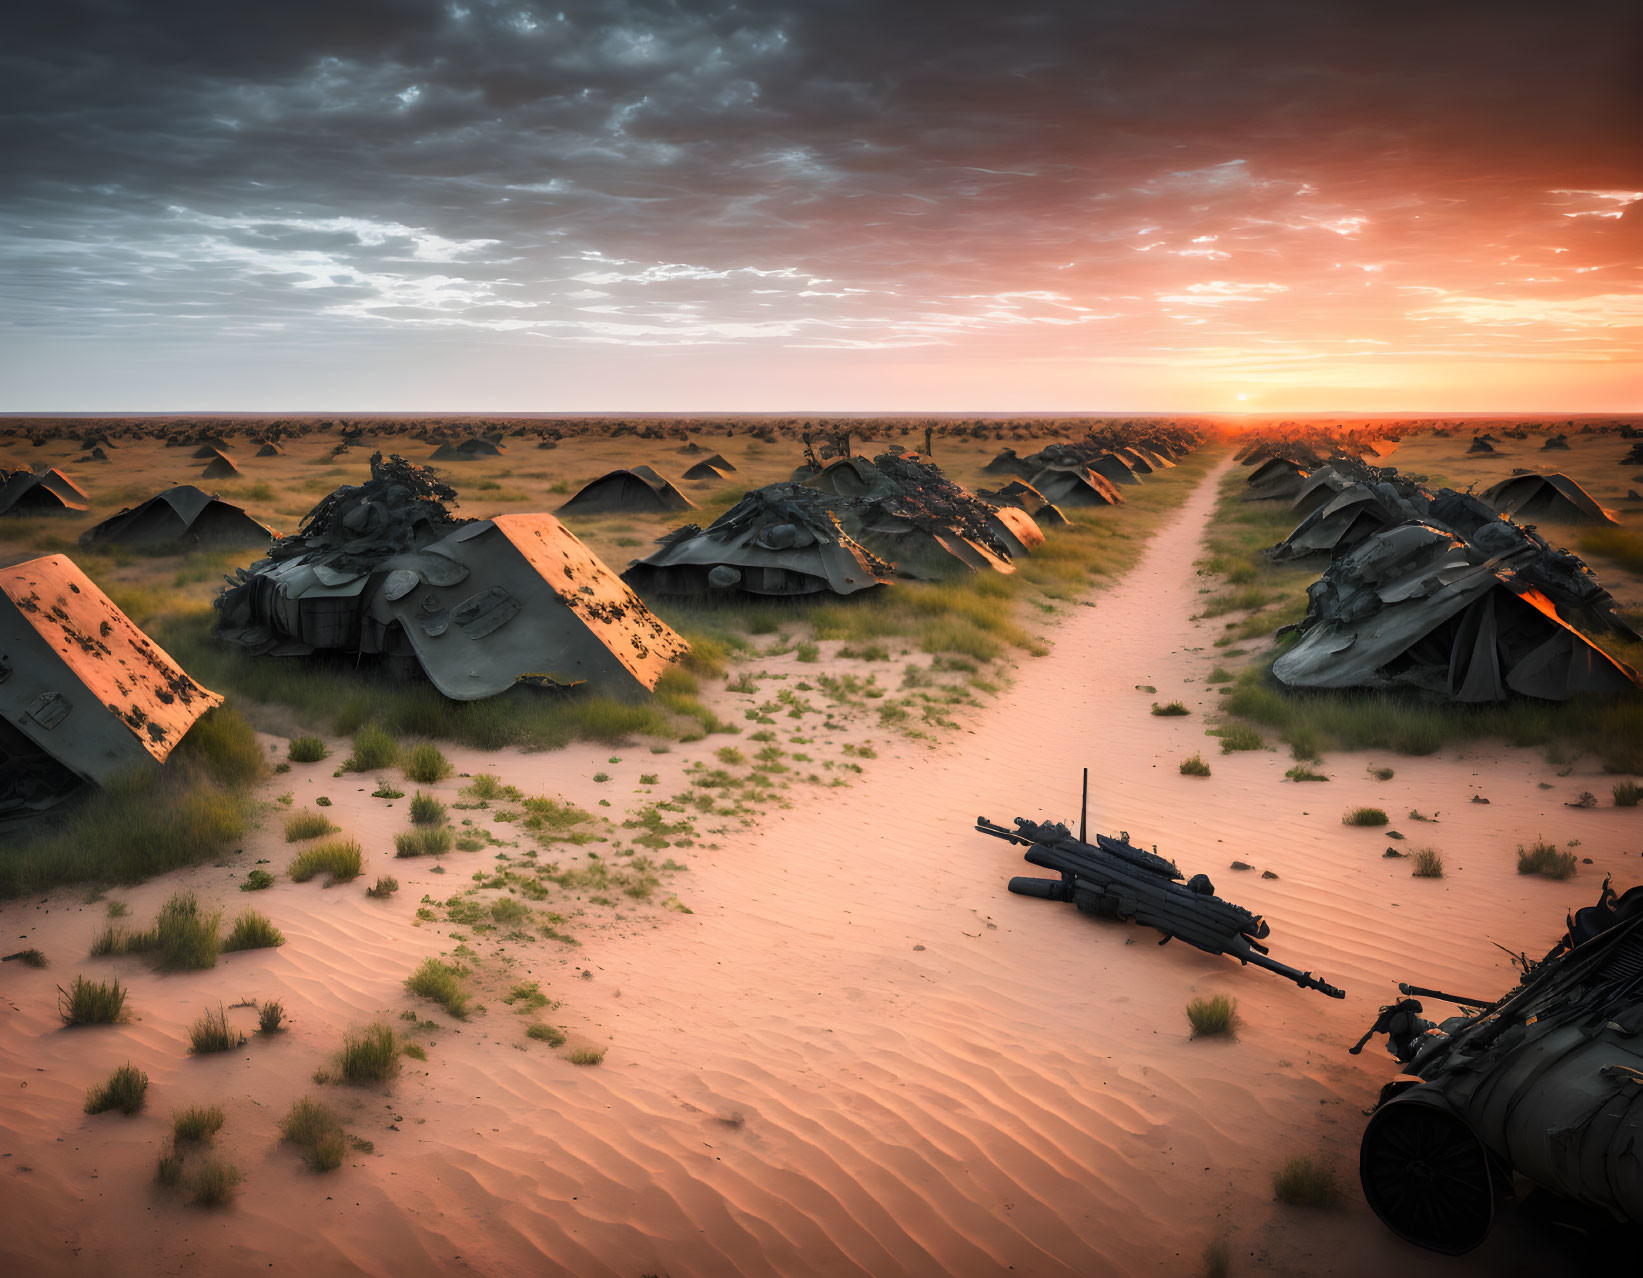 Desert sunset scene with abandoned military tanks and artillery in decay